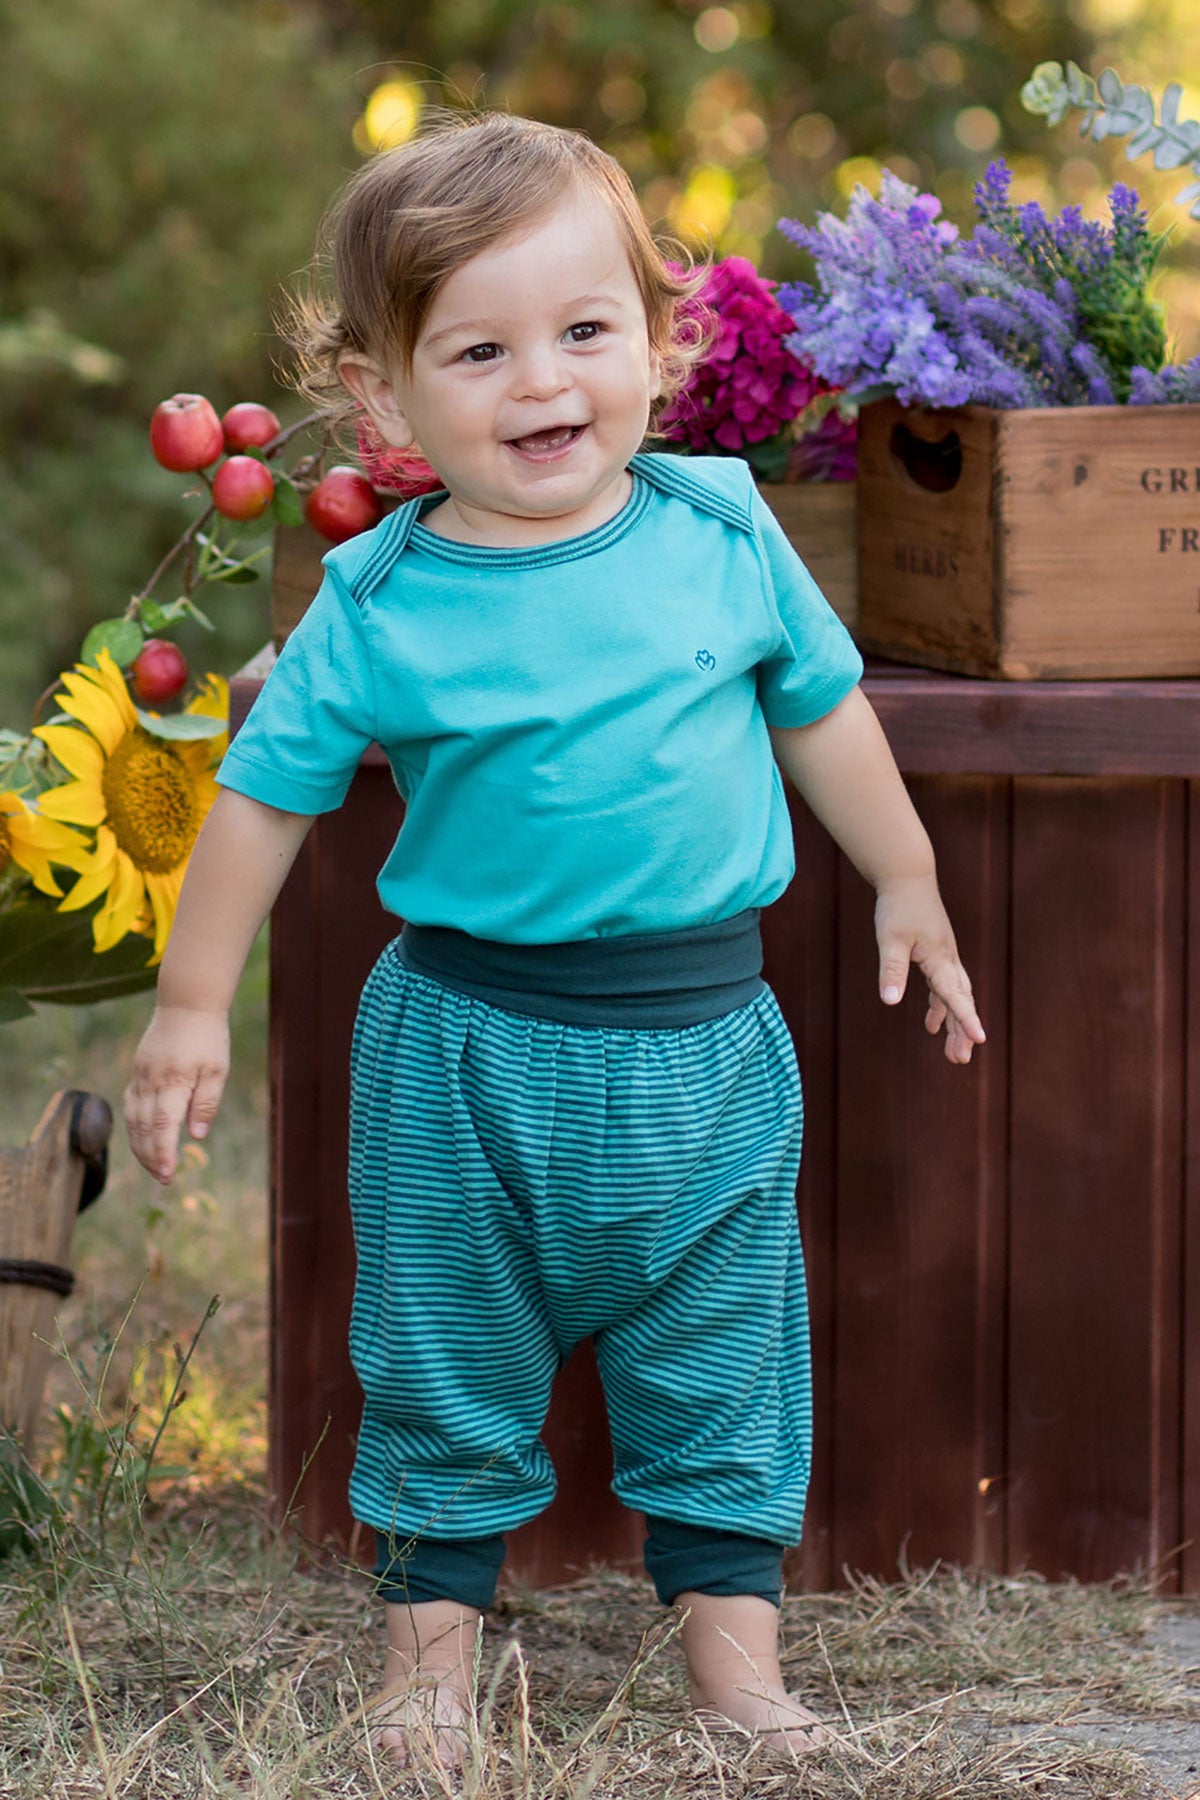 Organic bodysuit and Pants set for girls and boys Aged 3-12 Months colored green turquoise